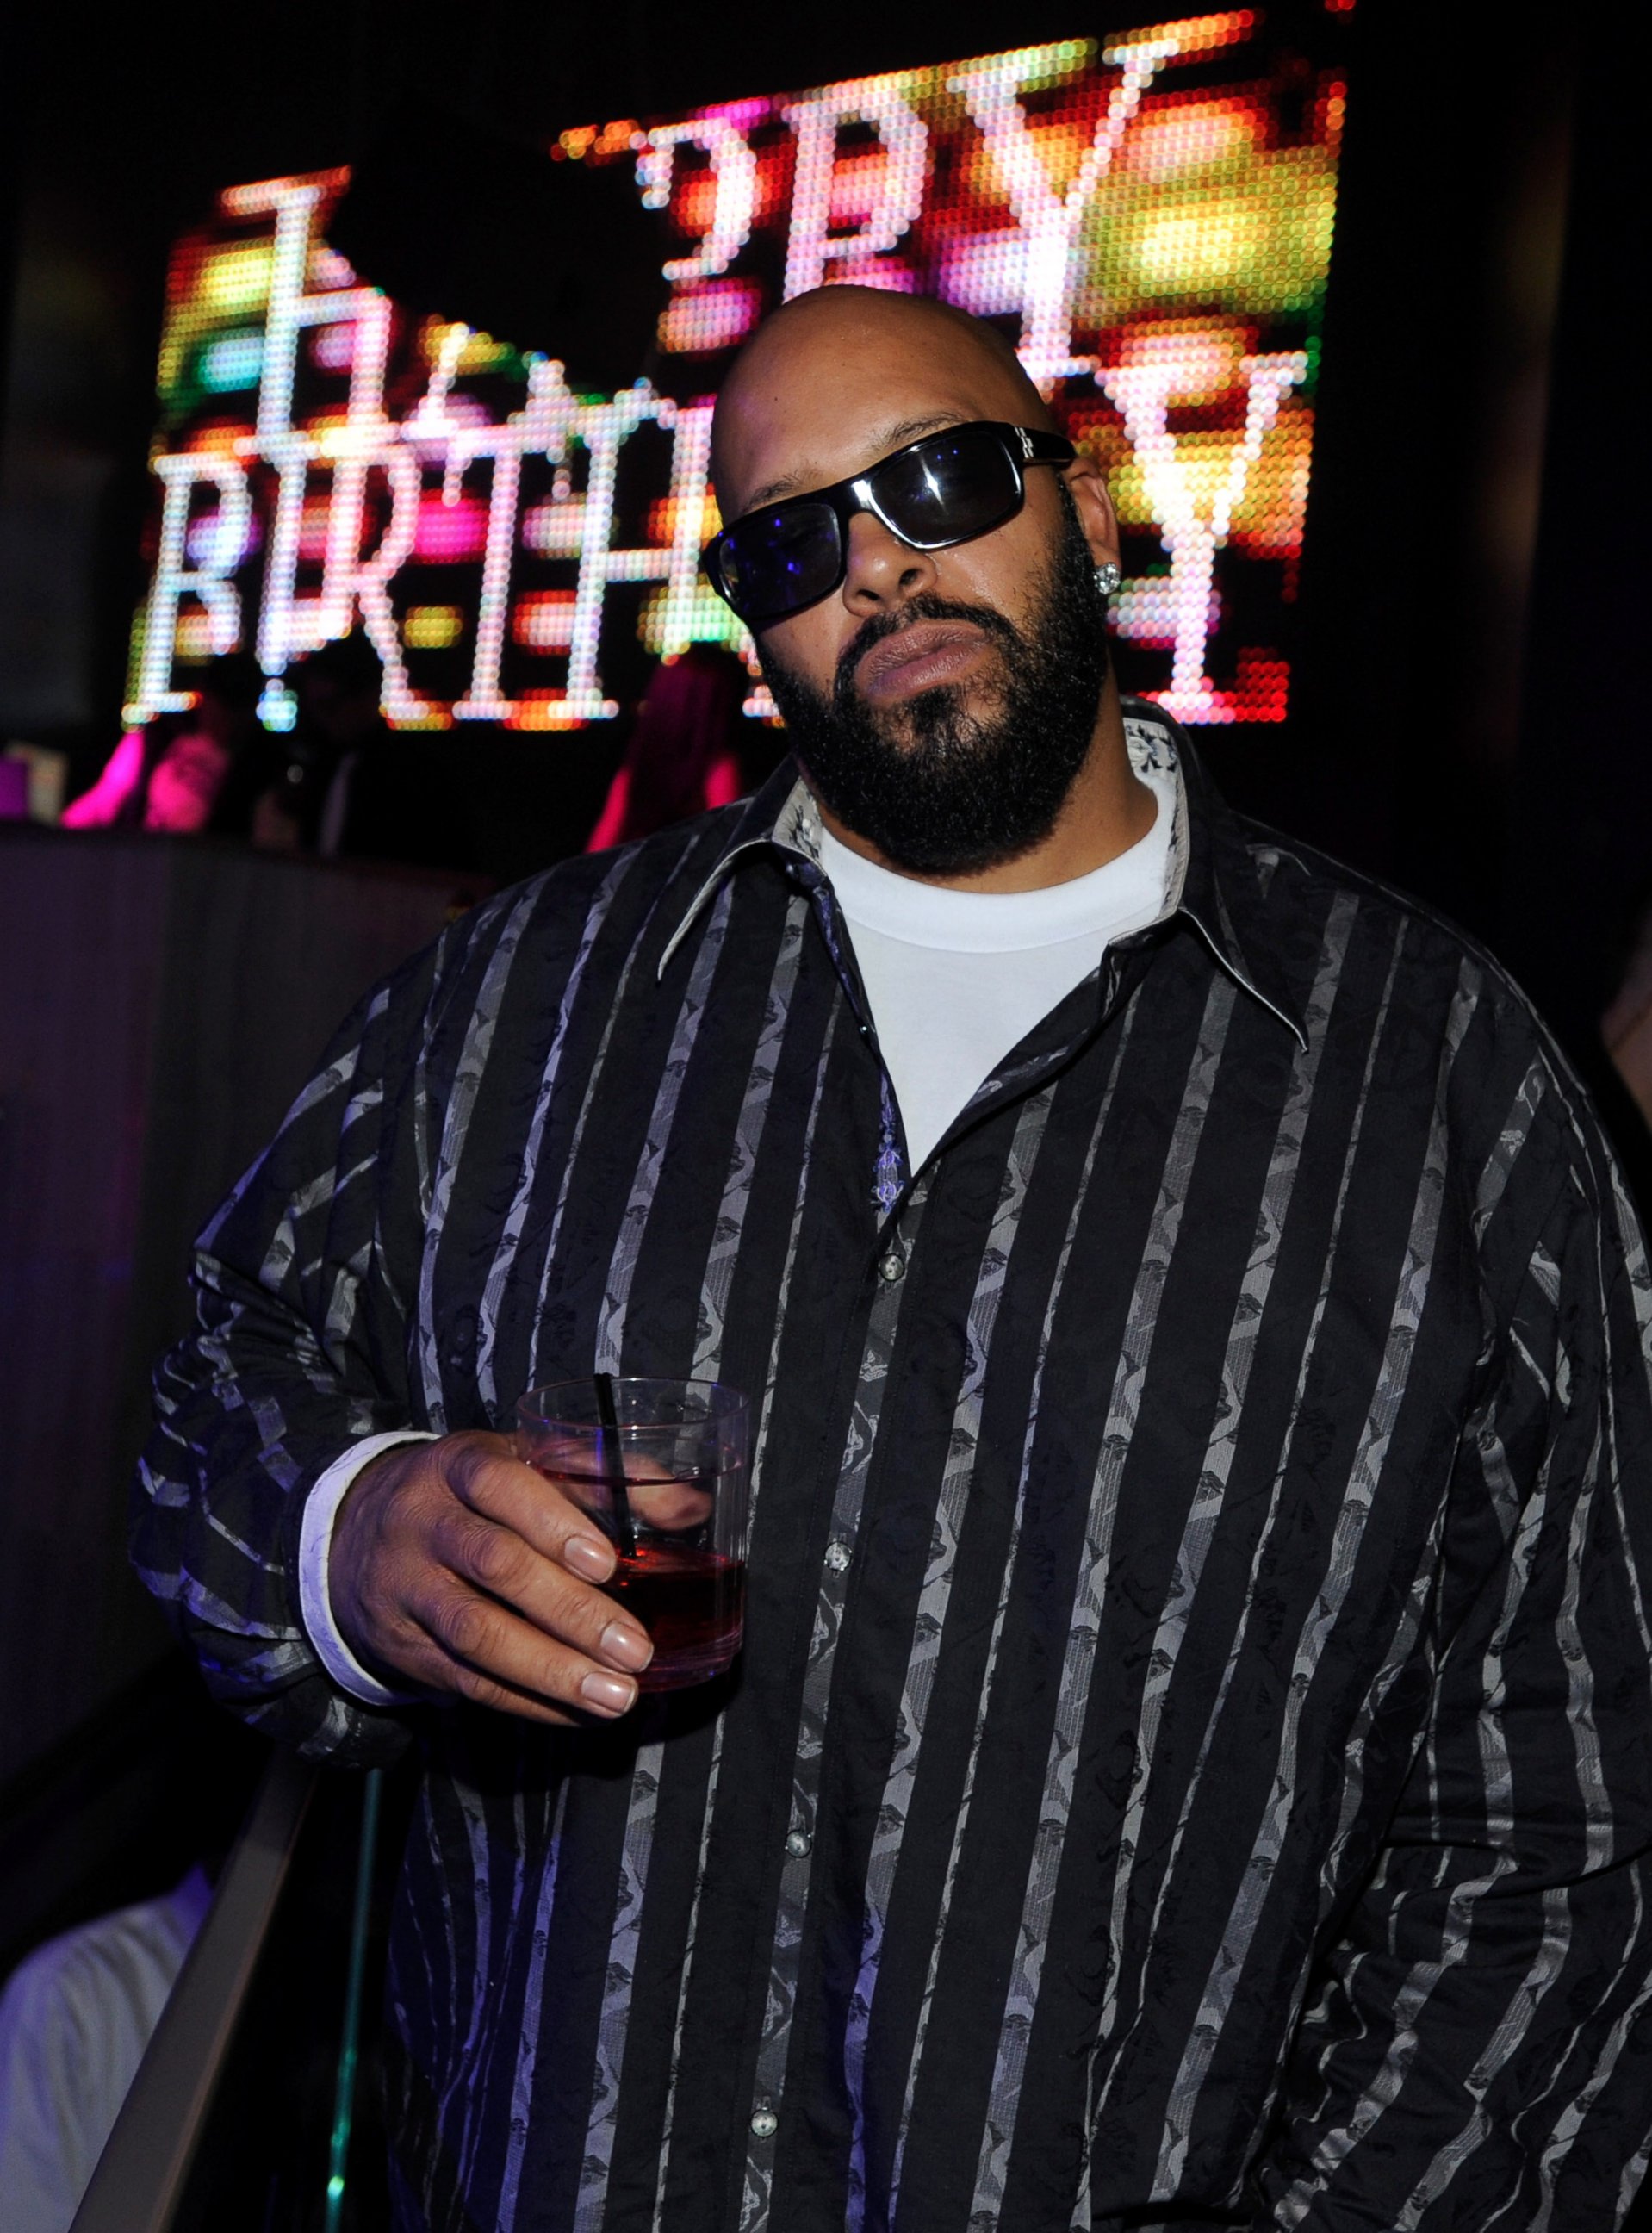 PHOTO: Marion 'Suge' Knight at the Chateau Nightclub & Gardens on November 19, 2011 in Las Vegas, Nevada.